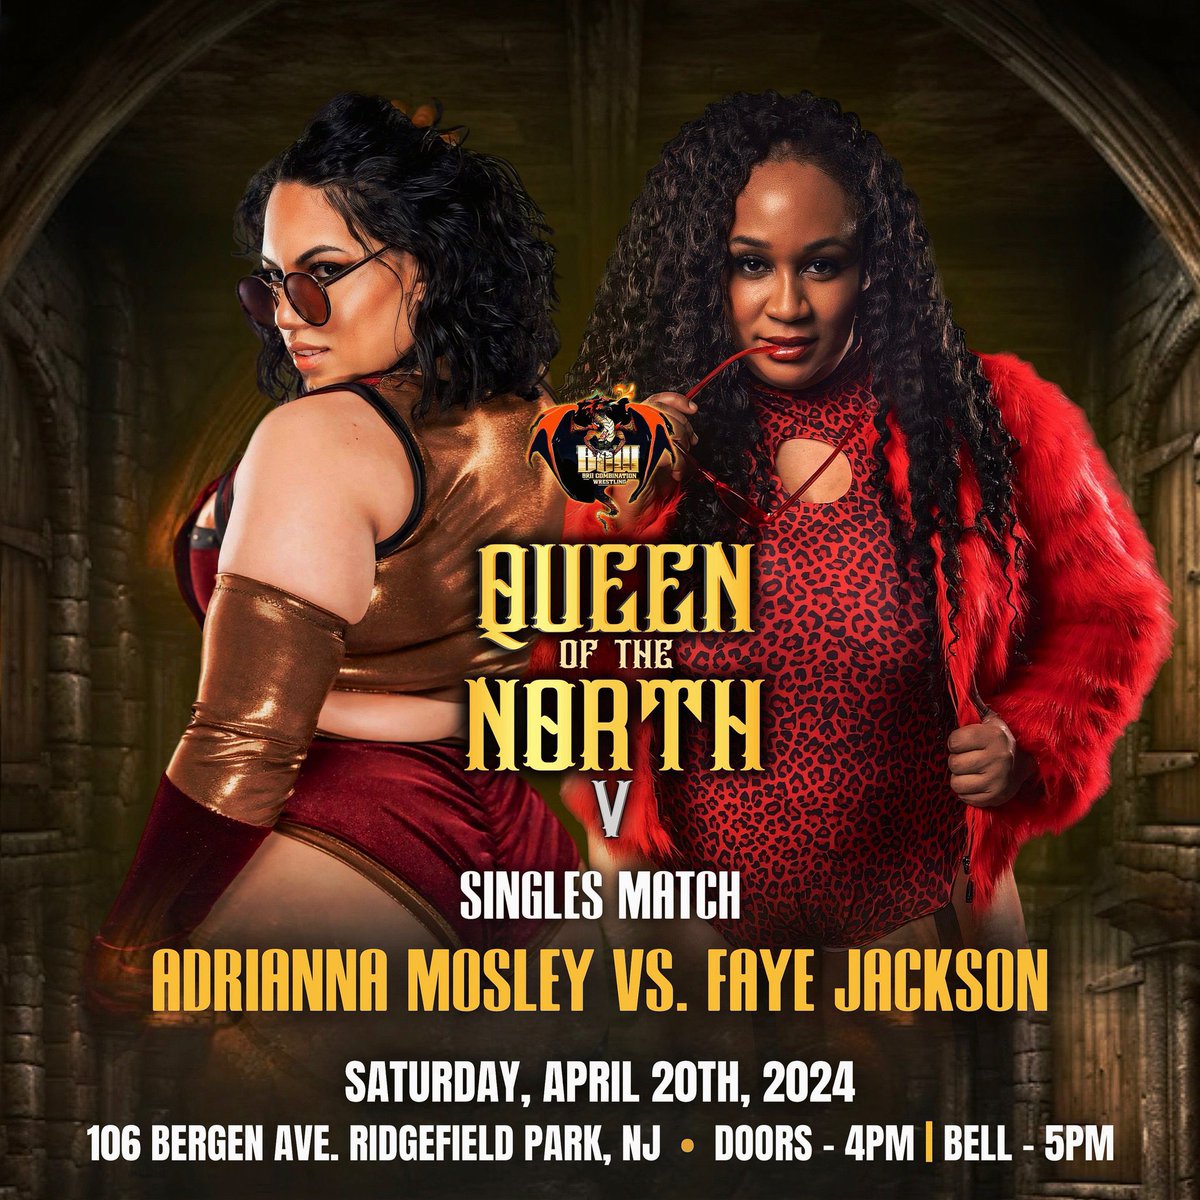 *cue DX- Are You Ready Today is the day I make my long awaited return to the House that Faye built! 5pm battle of the big girls 😍 @AdriannaMosley9 Come thru